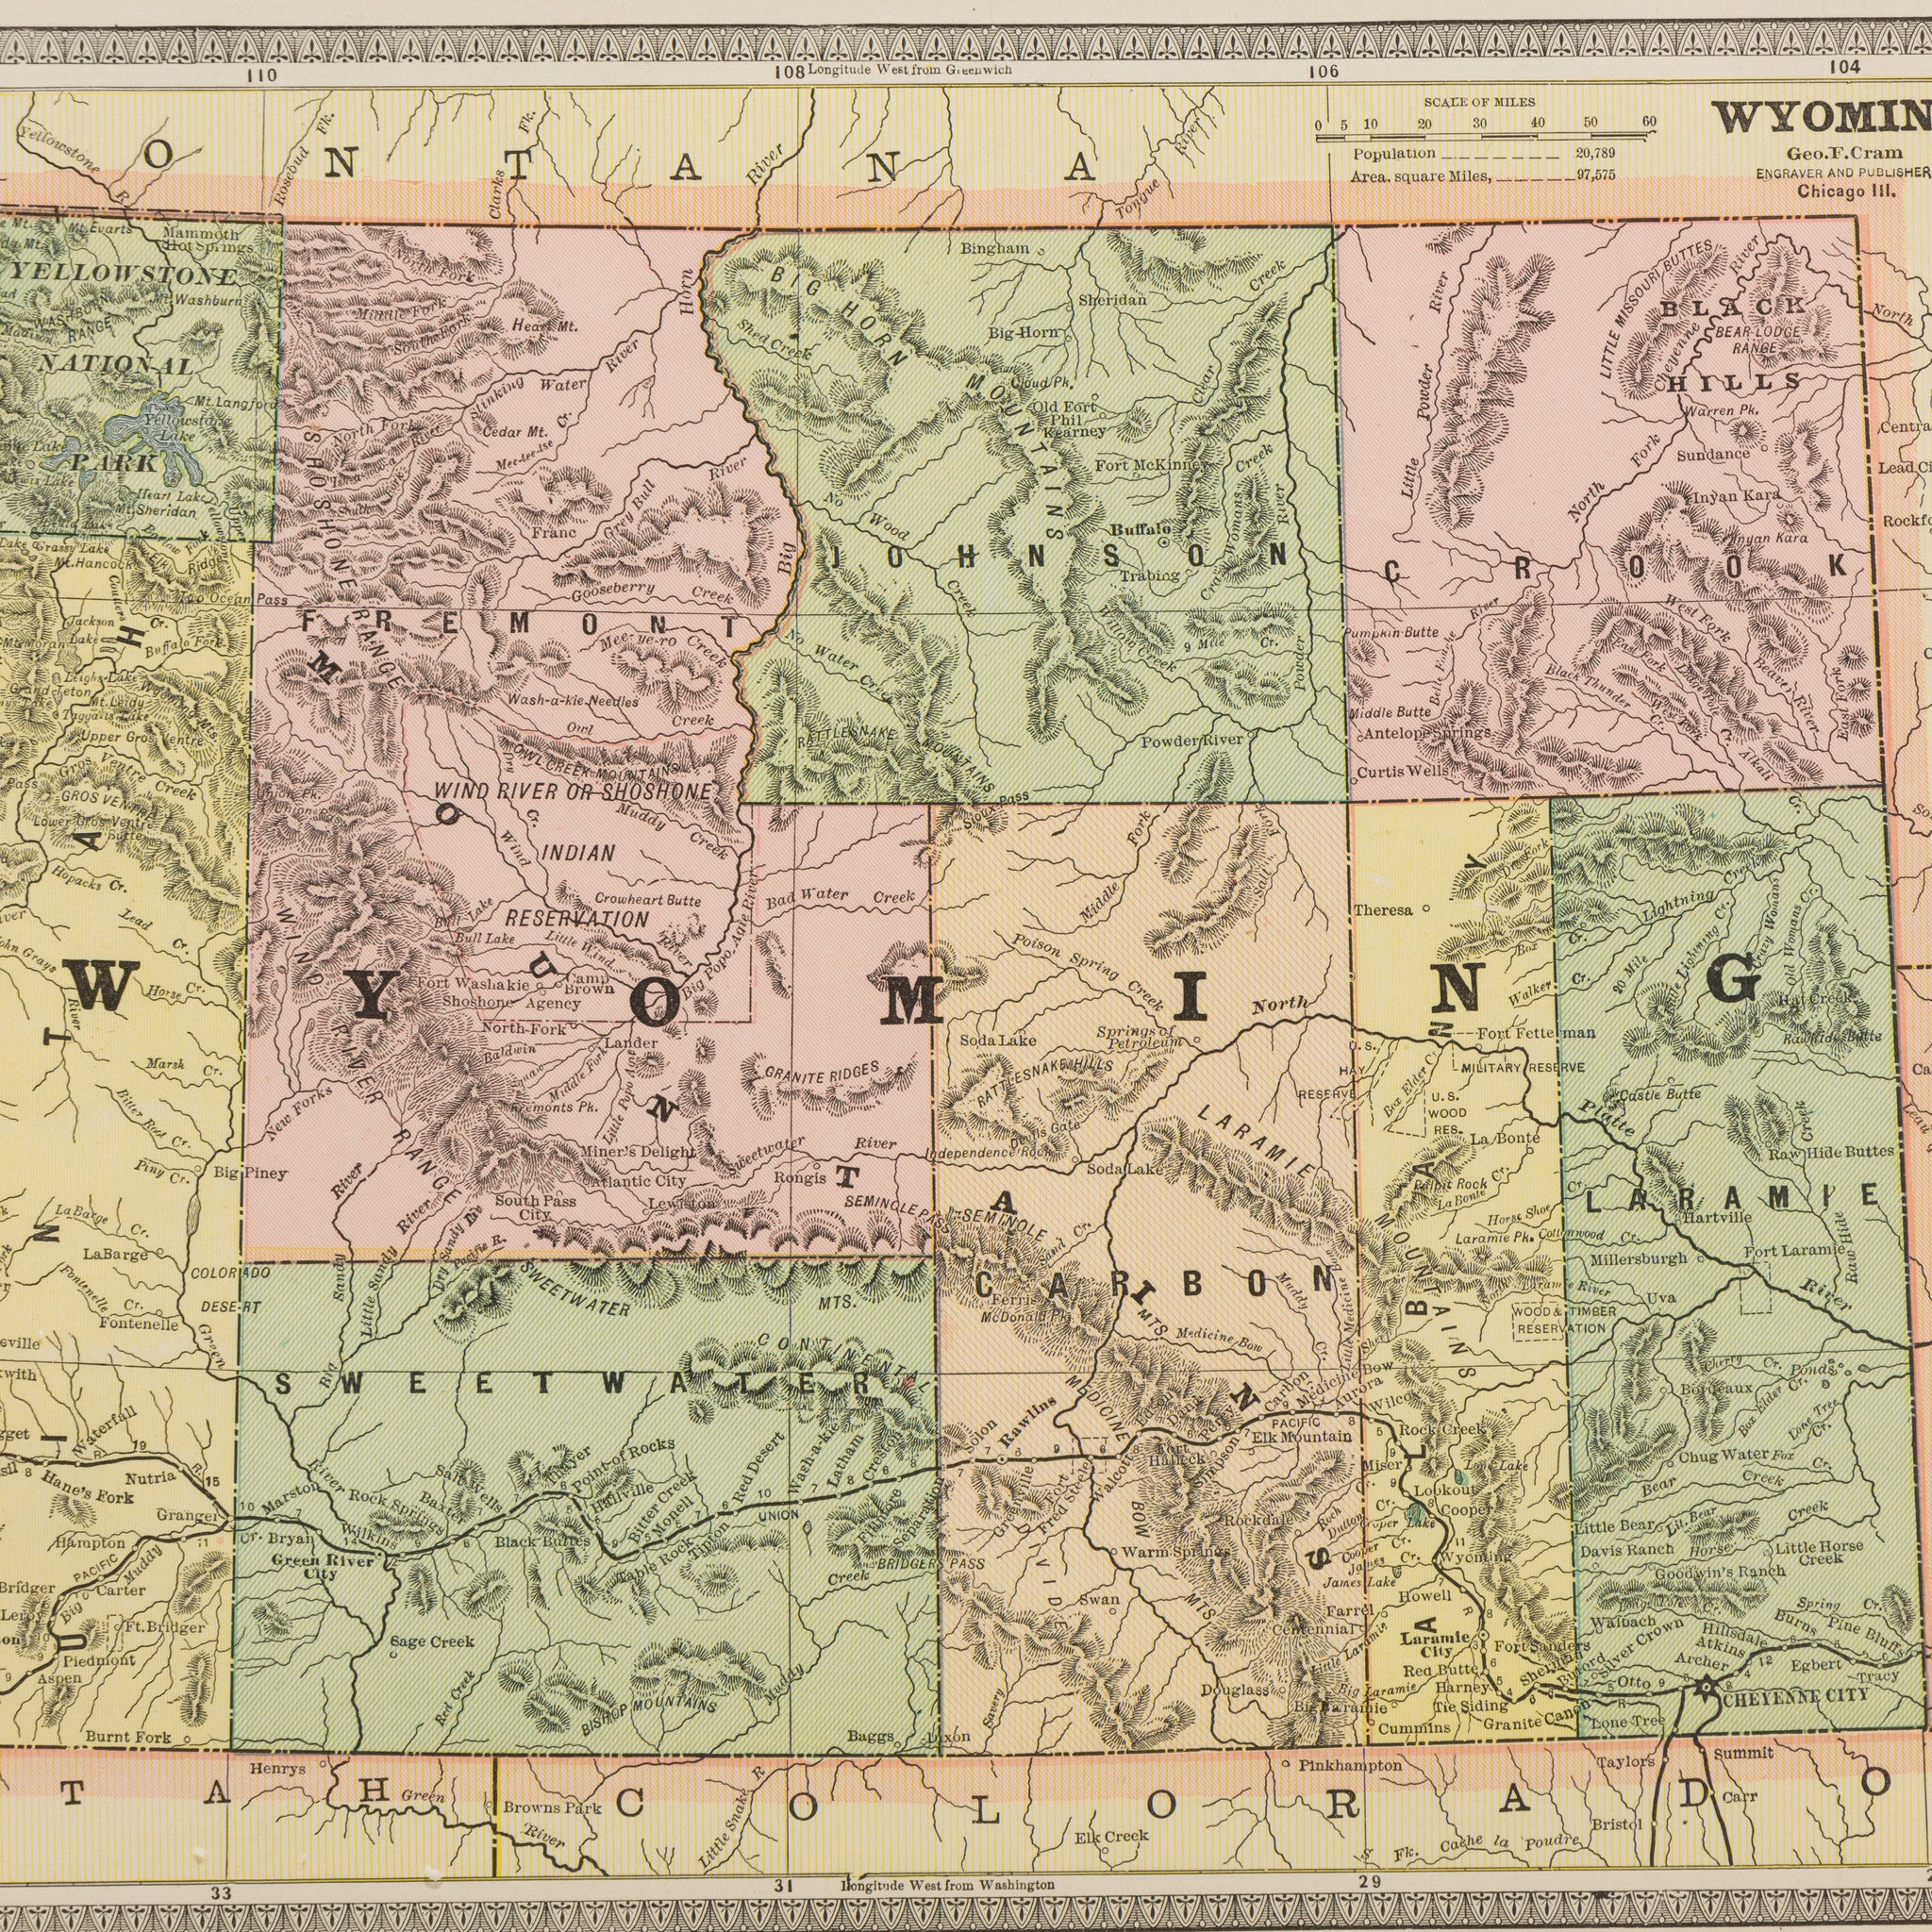 Wyoming Map by George F. Cram